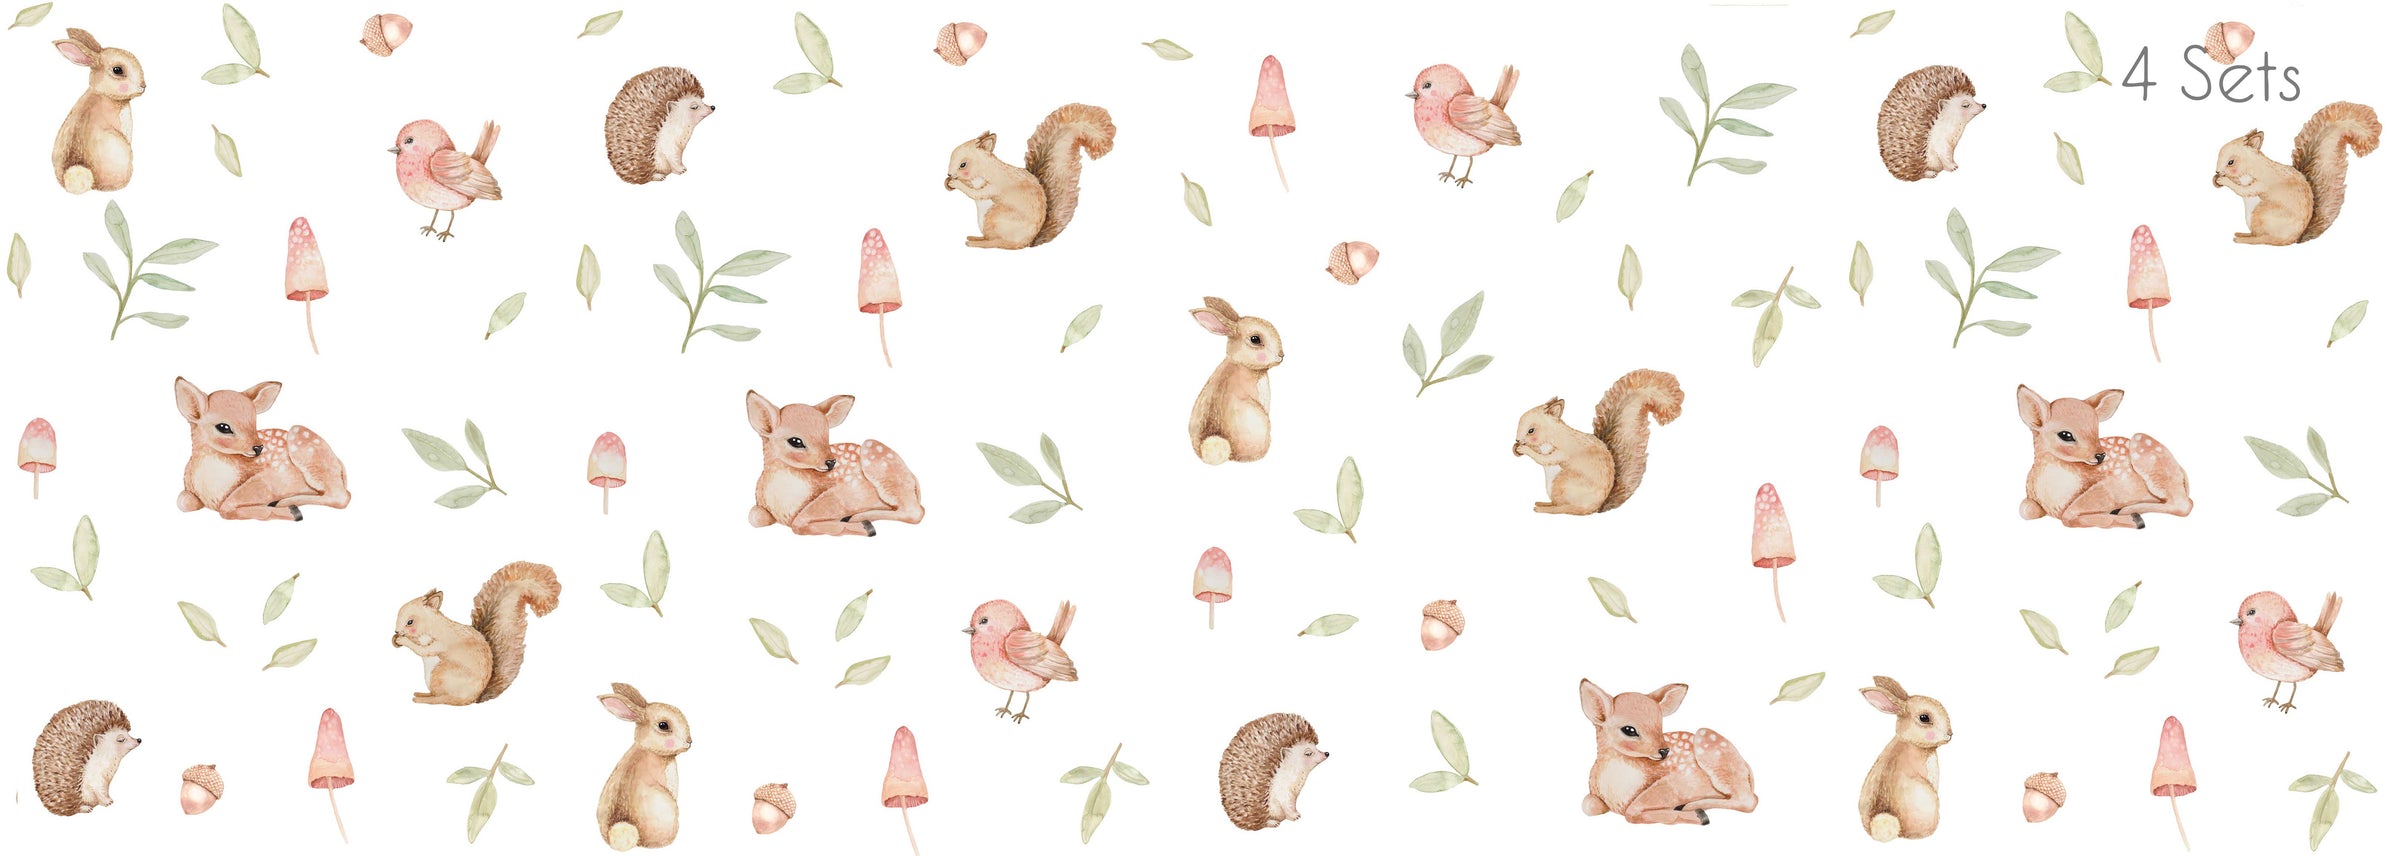 Woodlands Wall Stickers